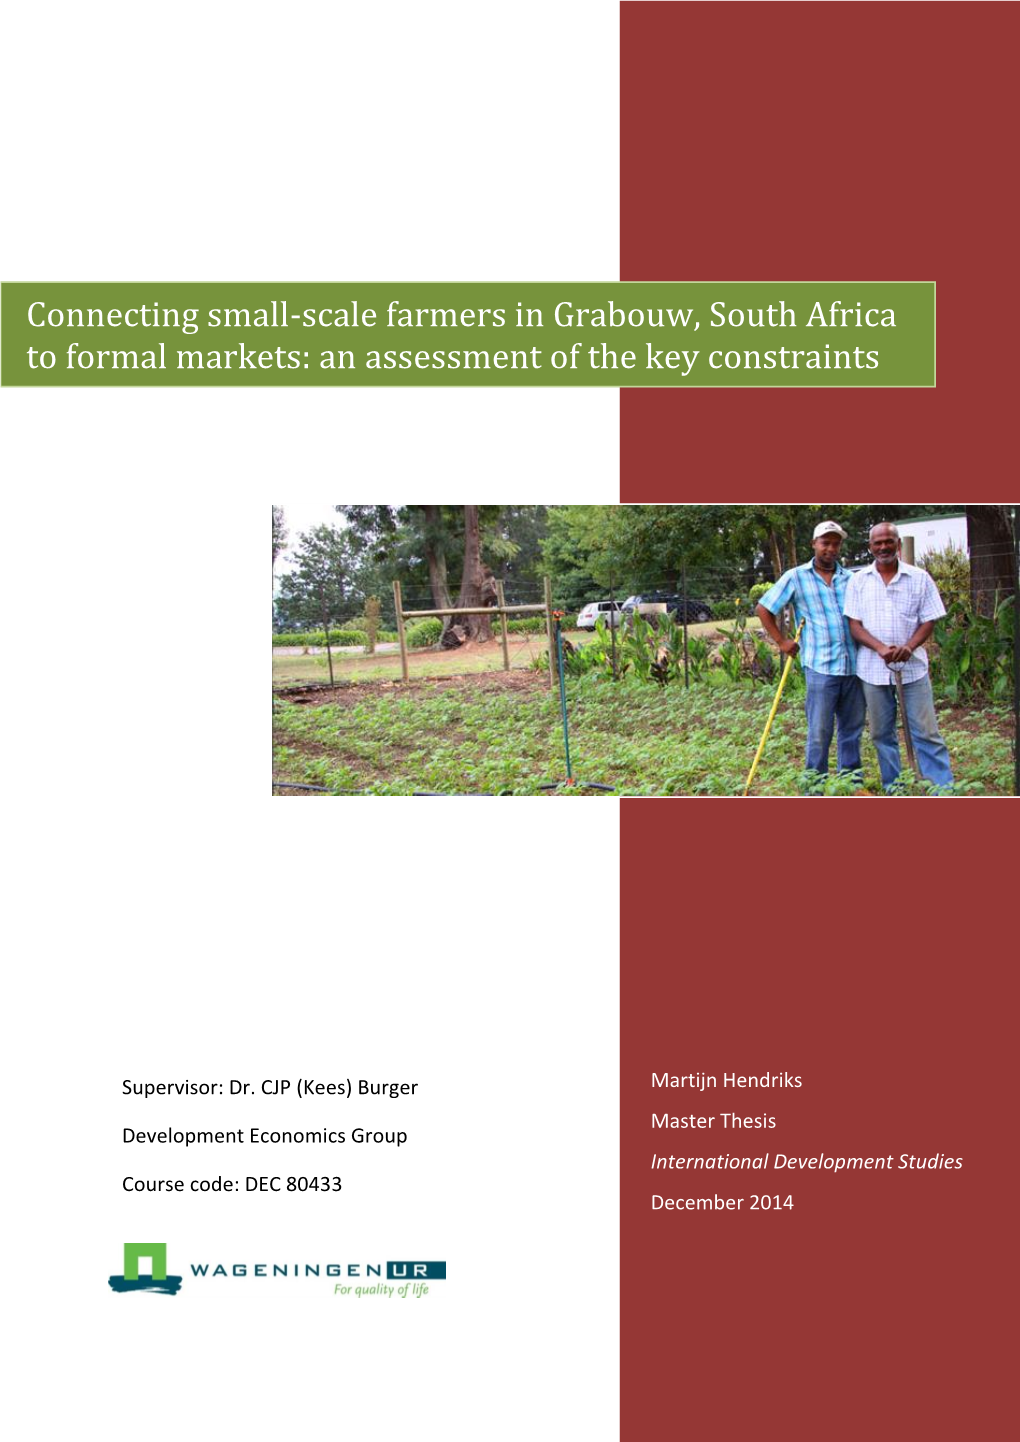 Connecting Small-Scale Farmers in Grabouw, South Africa to Formal Markets: an Assessment of the Key Constraints